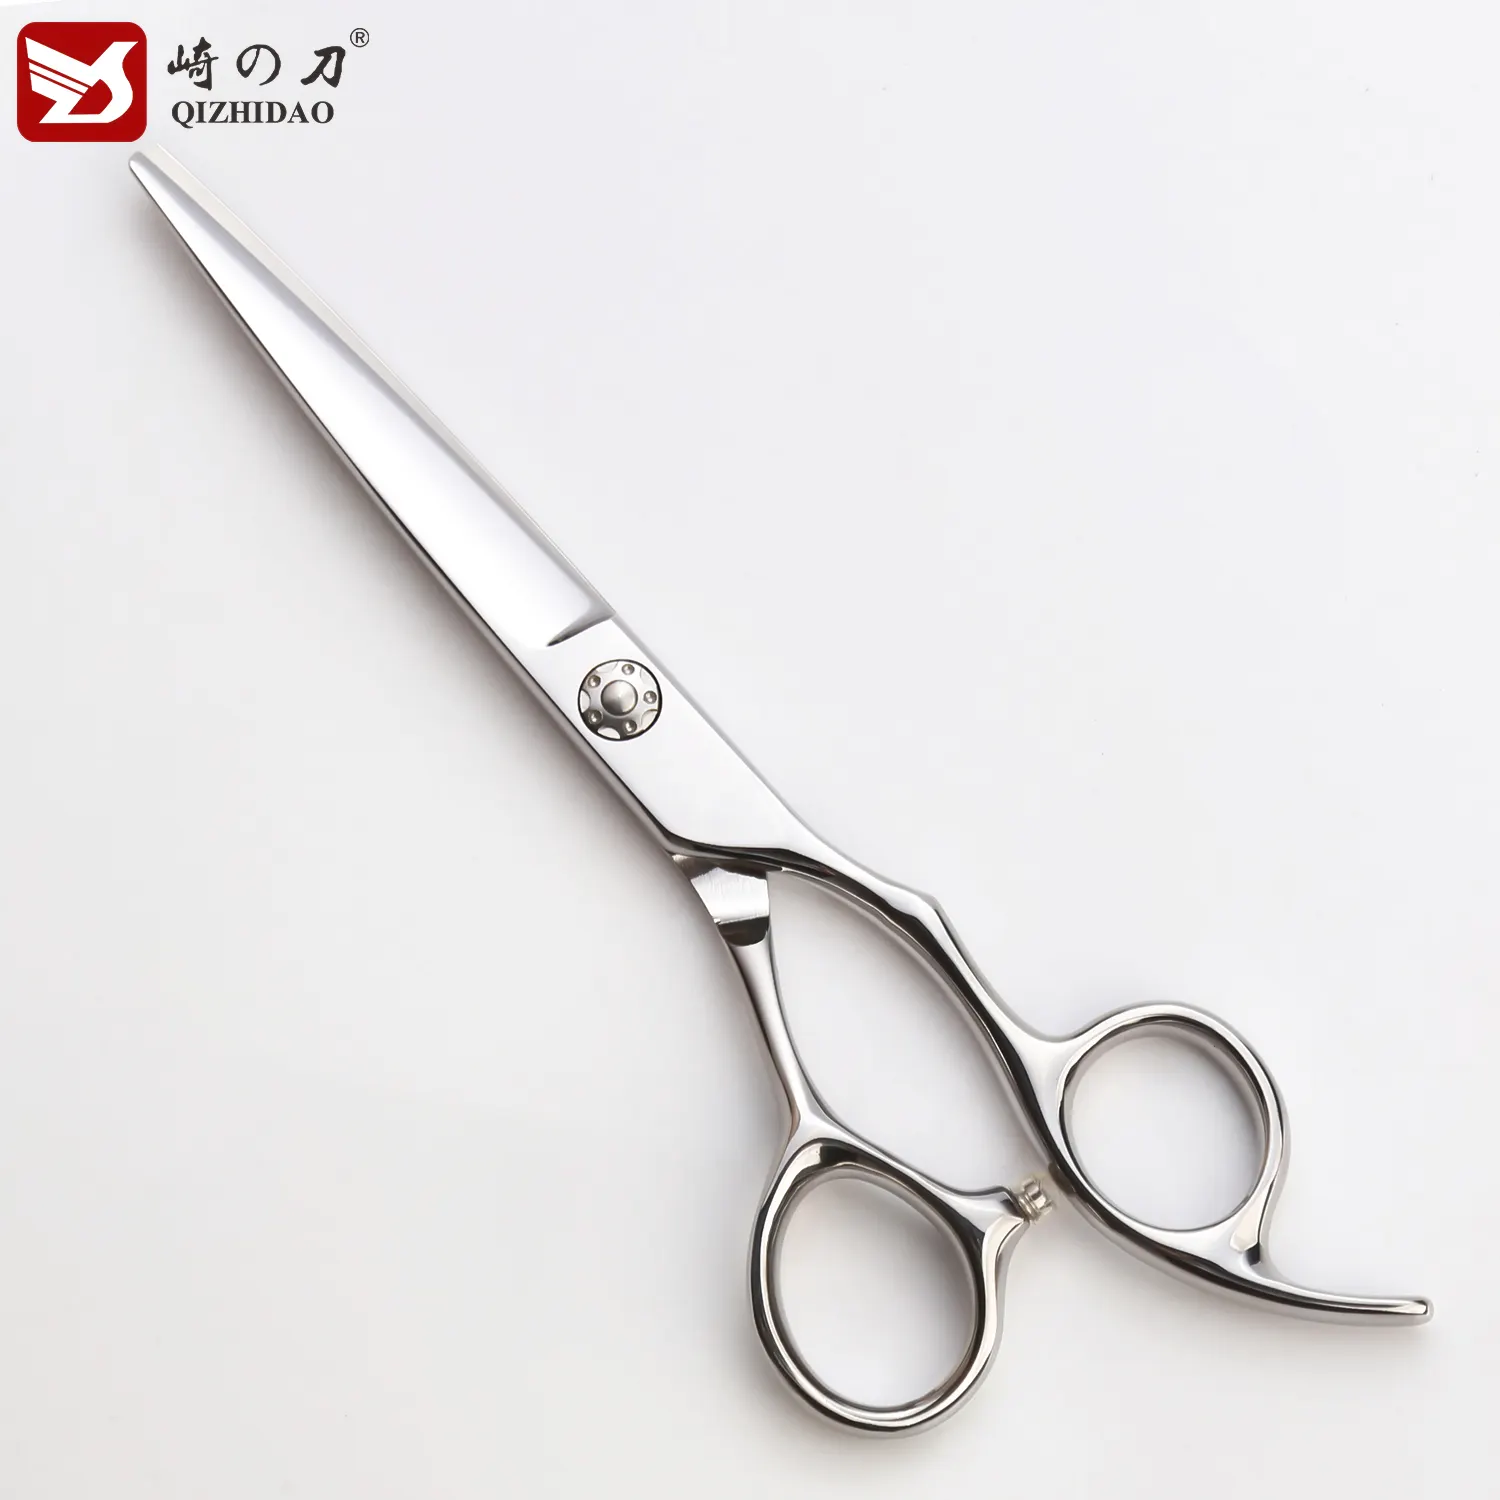 6inch Barber Scissors Hair Cutting Thinning Shears Japanese 440c Steel Professional Hairdressing Sissors